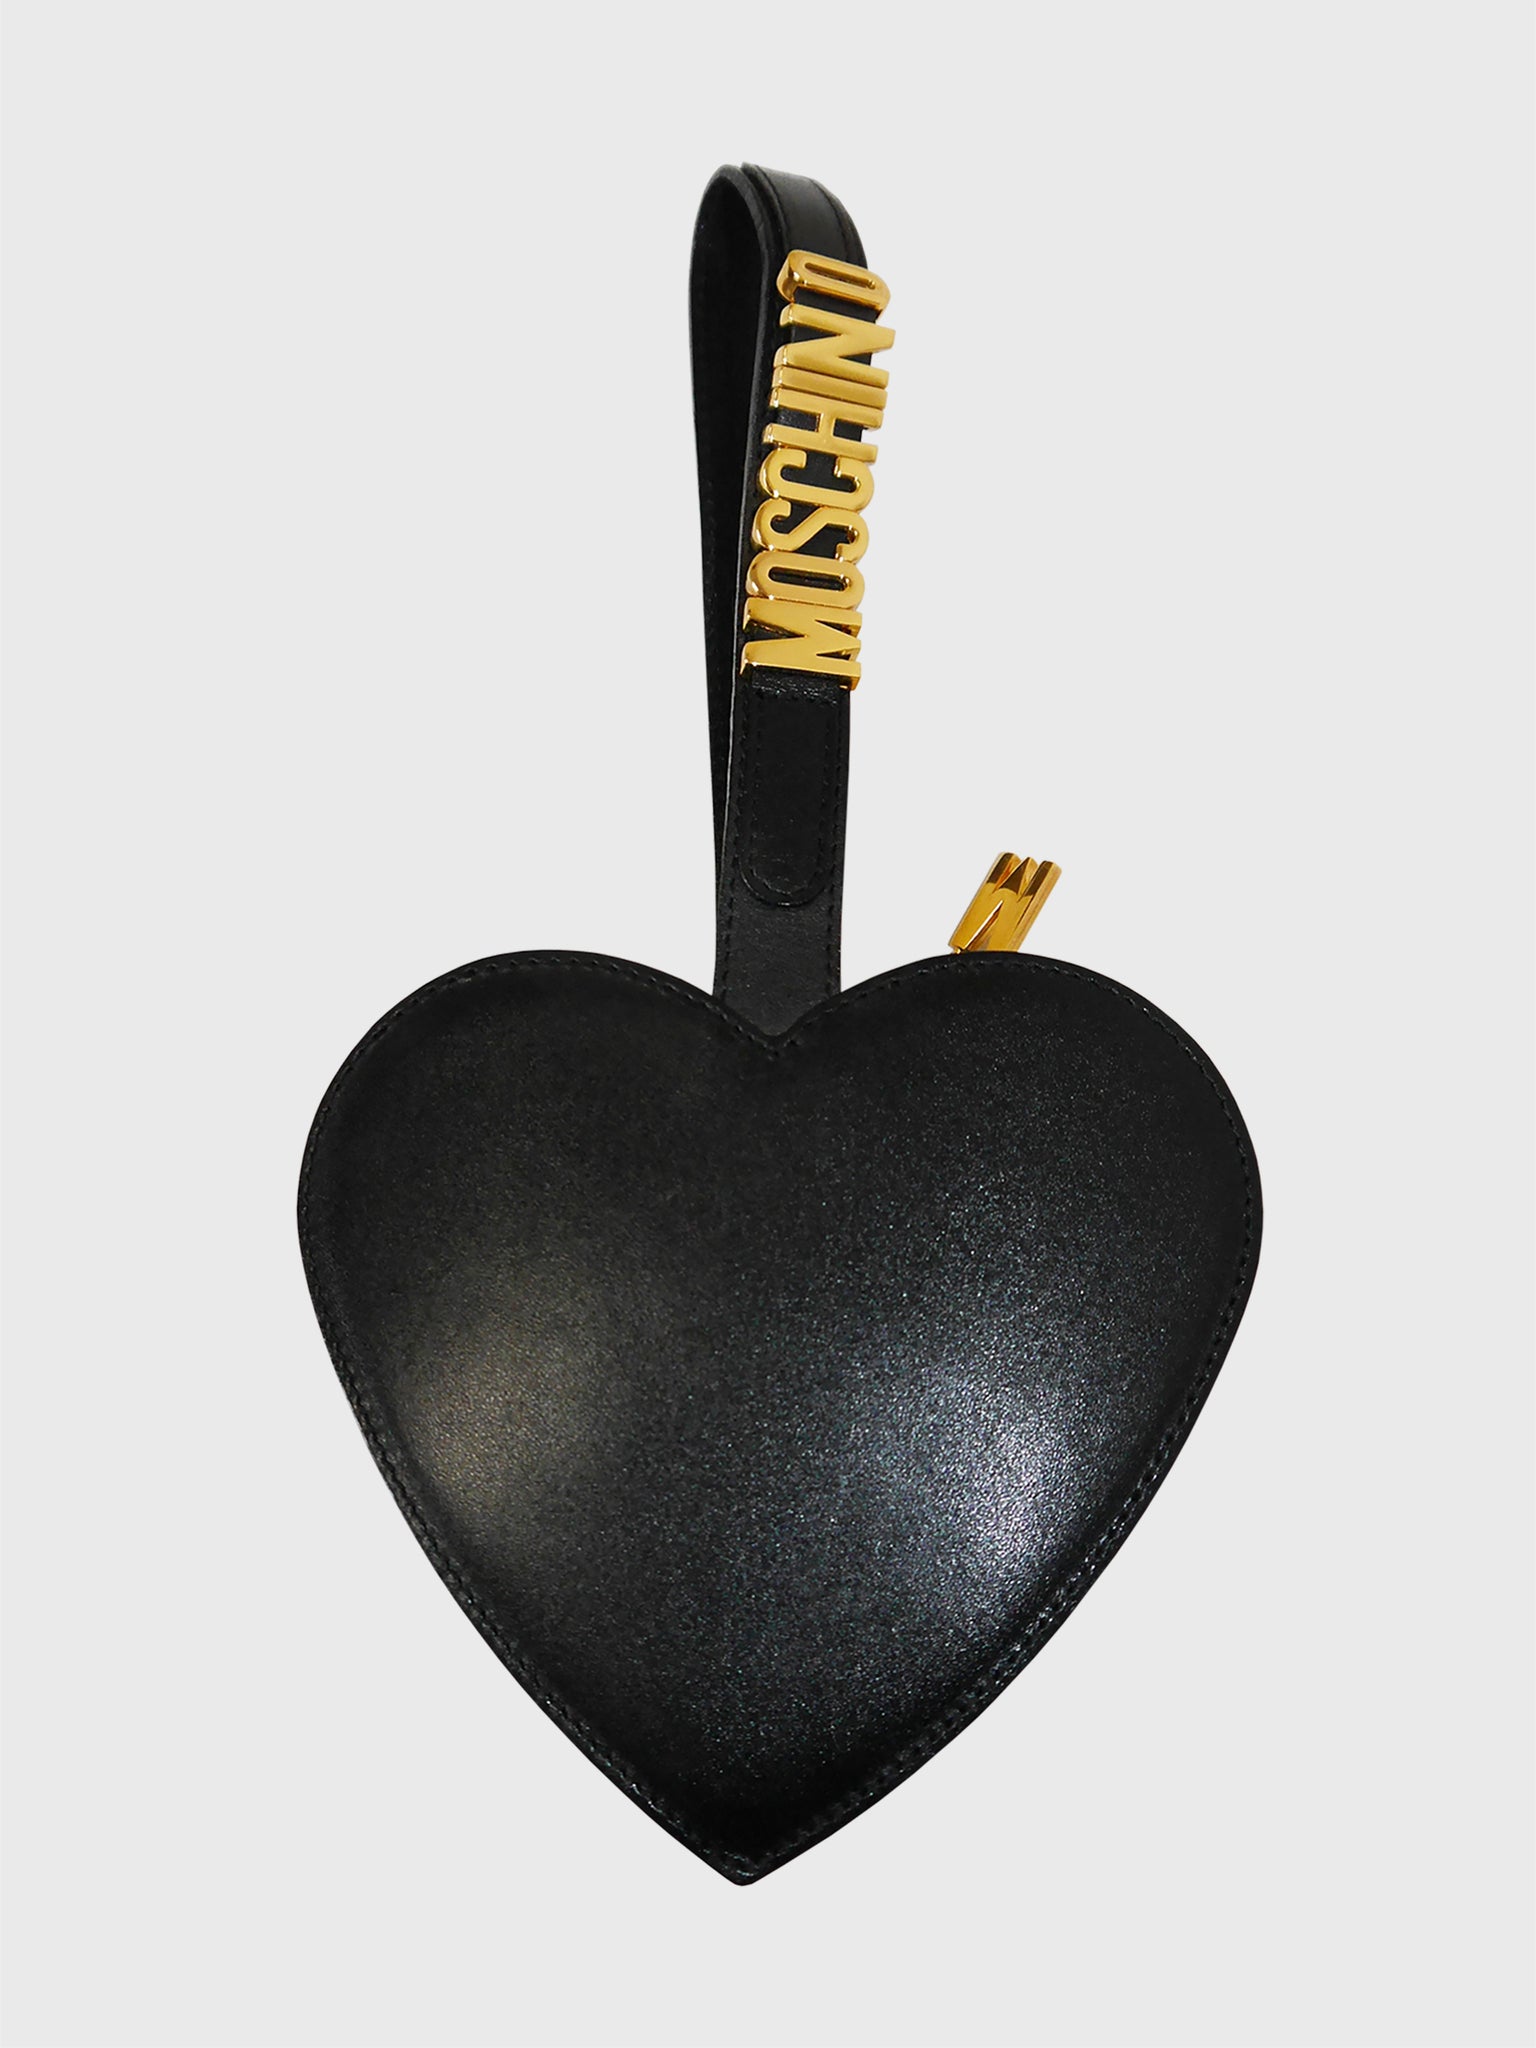 MOSCHINO by Redwall 1990s Vintage Black Heart Wristlet Evening Bag